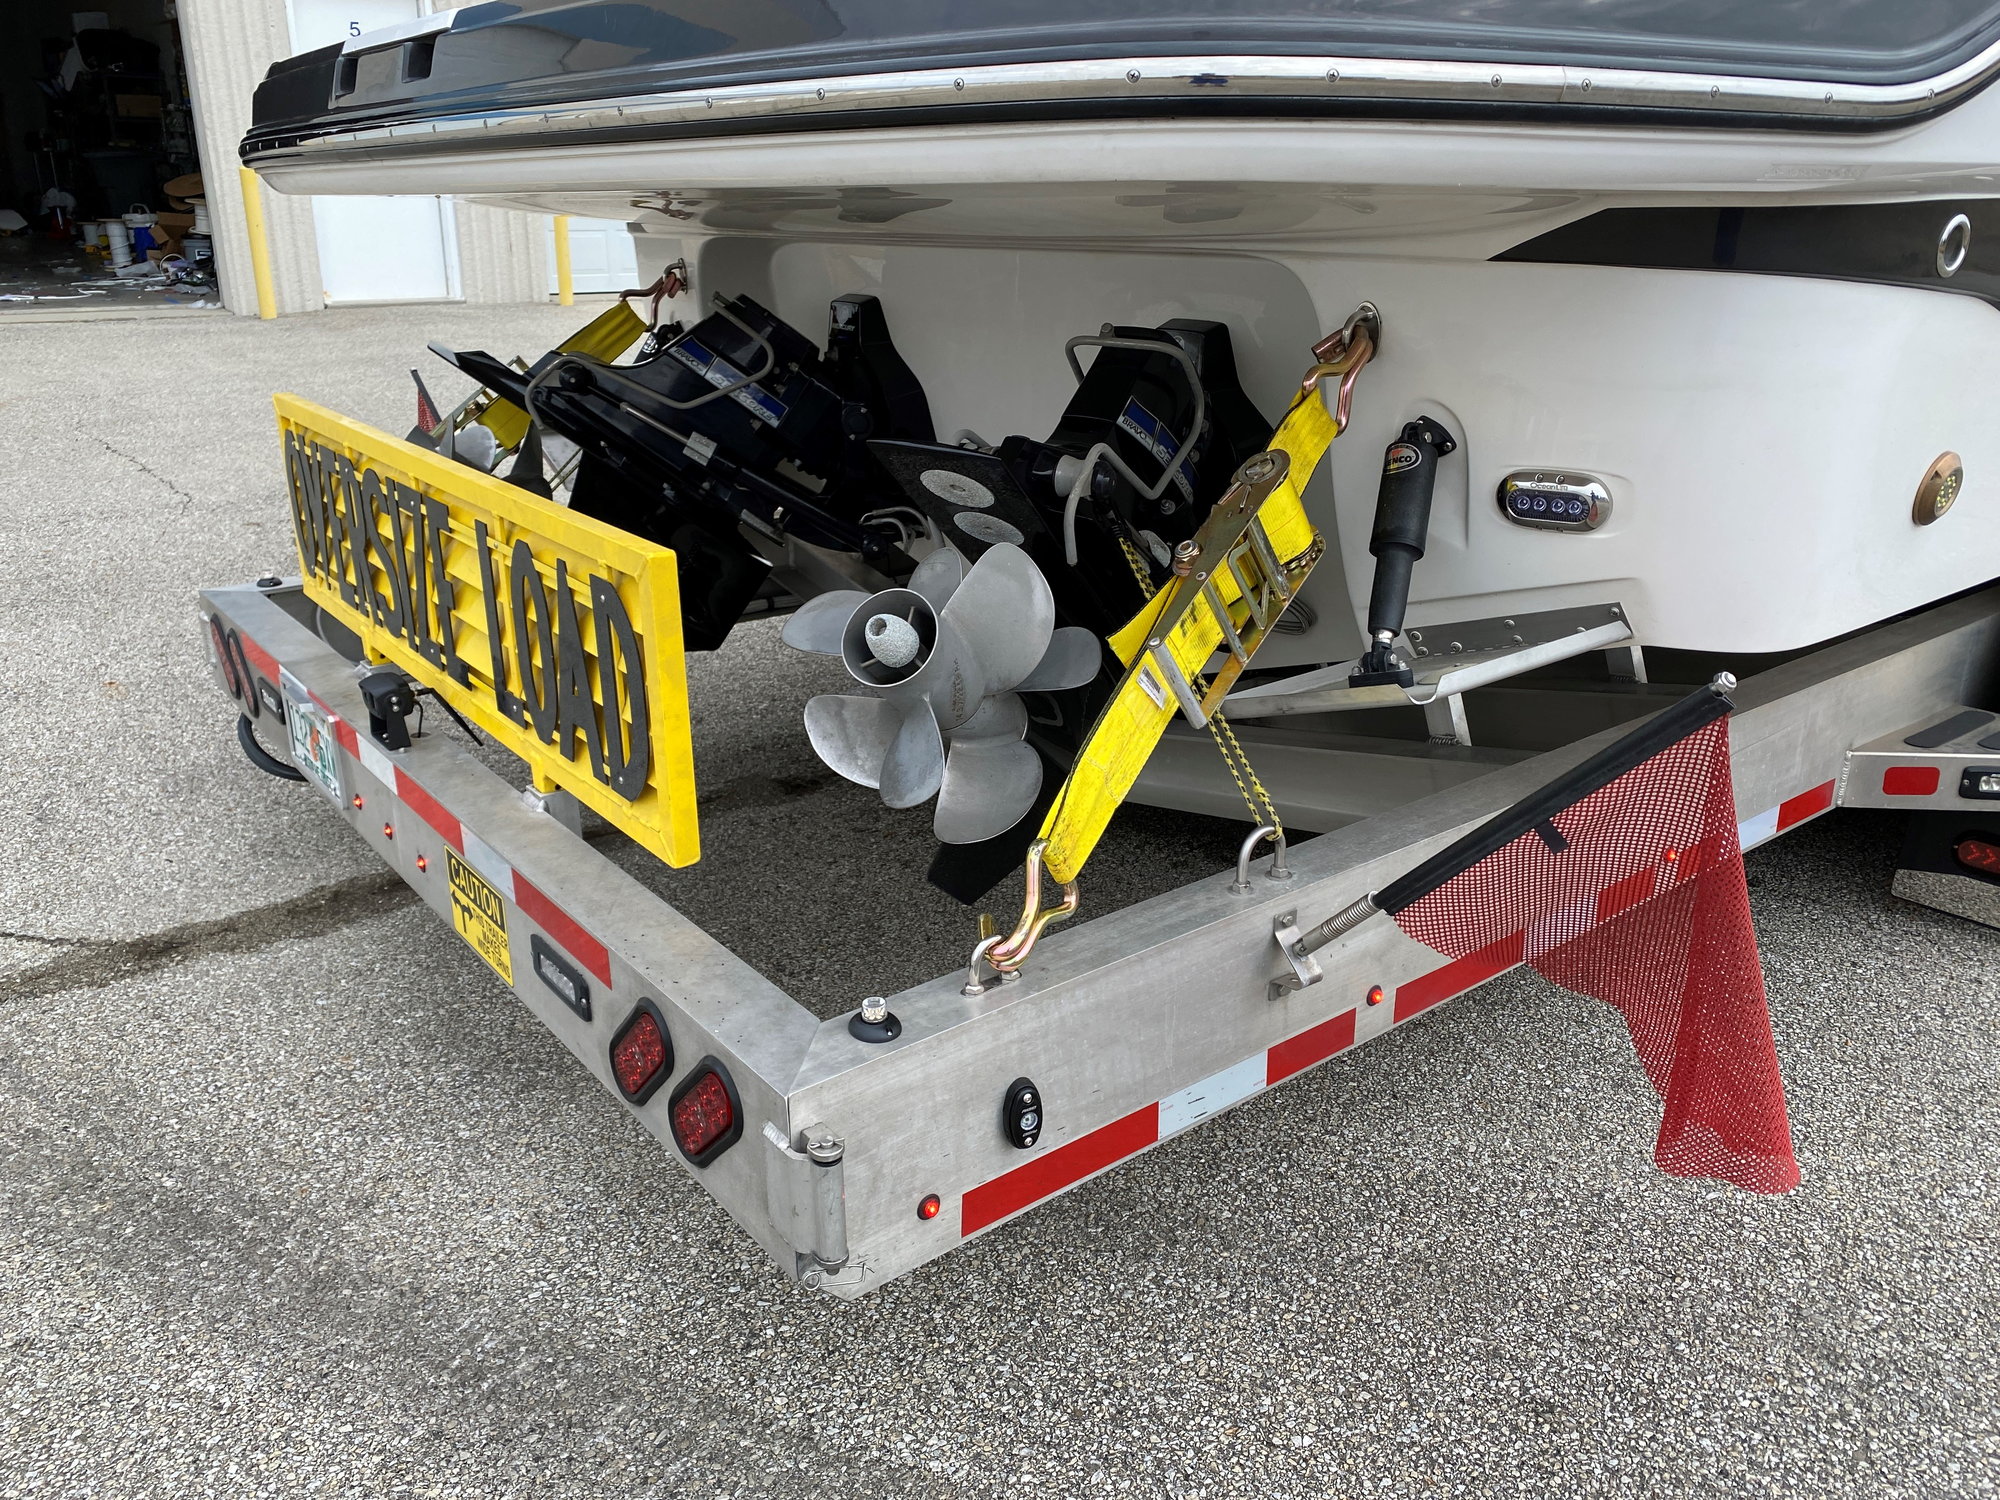 Boat launch alone from trailer : how to - The Hull Truth - Boating